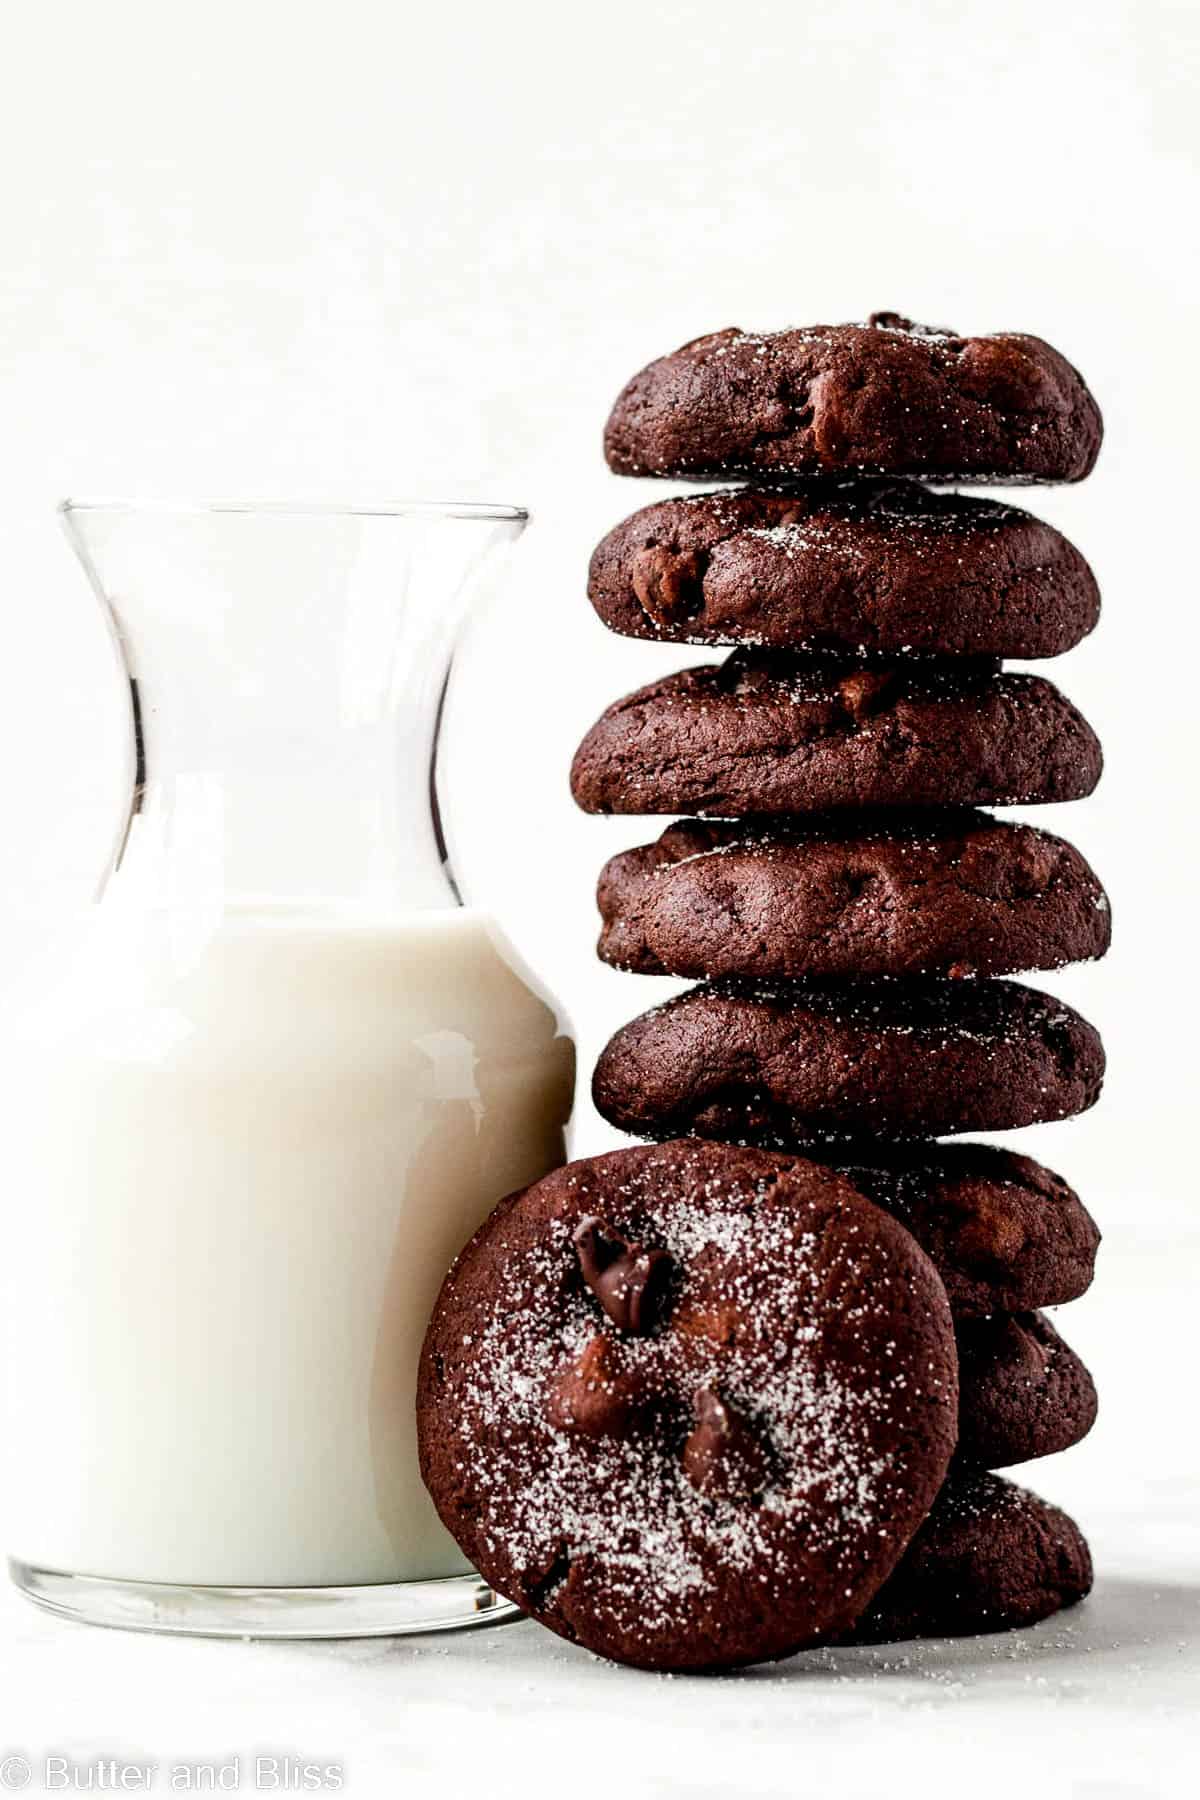 Tall stack of double chocolate chip cookies leaning against a glass of milk.